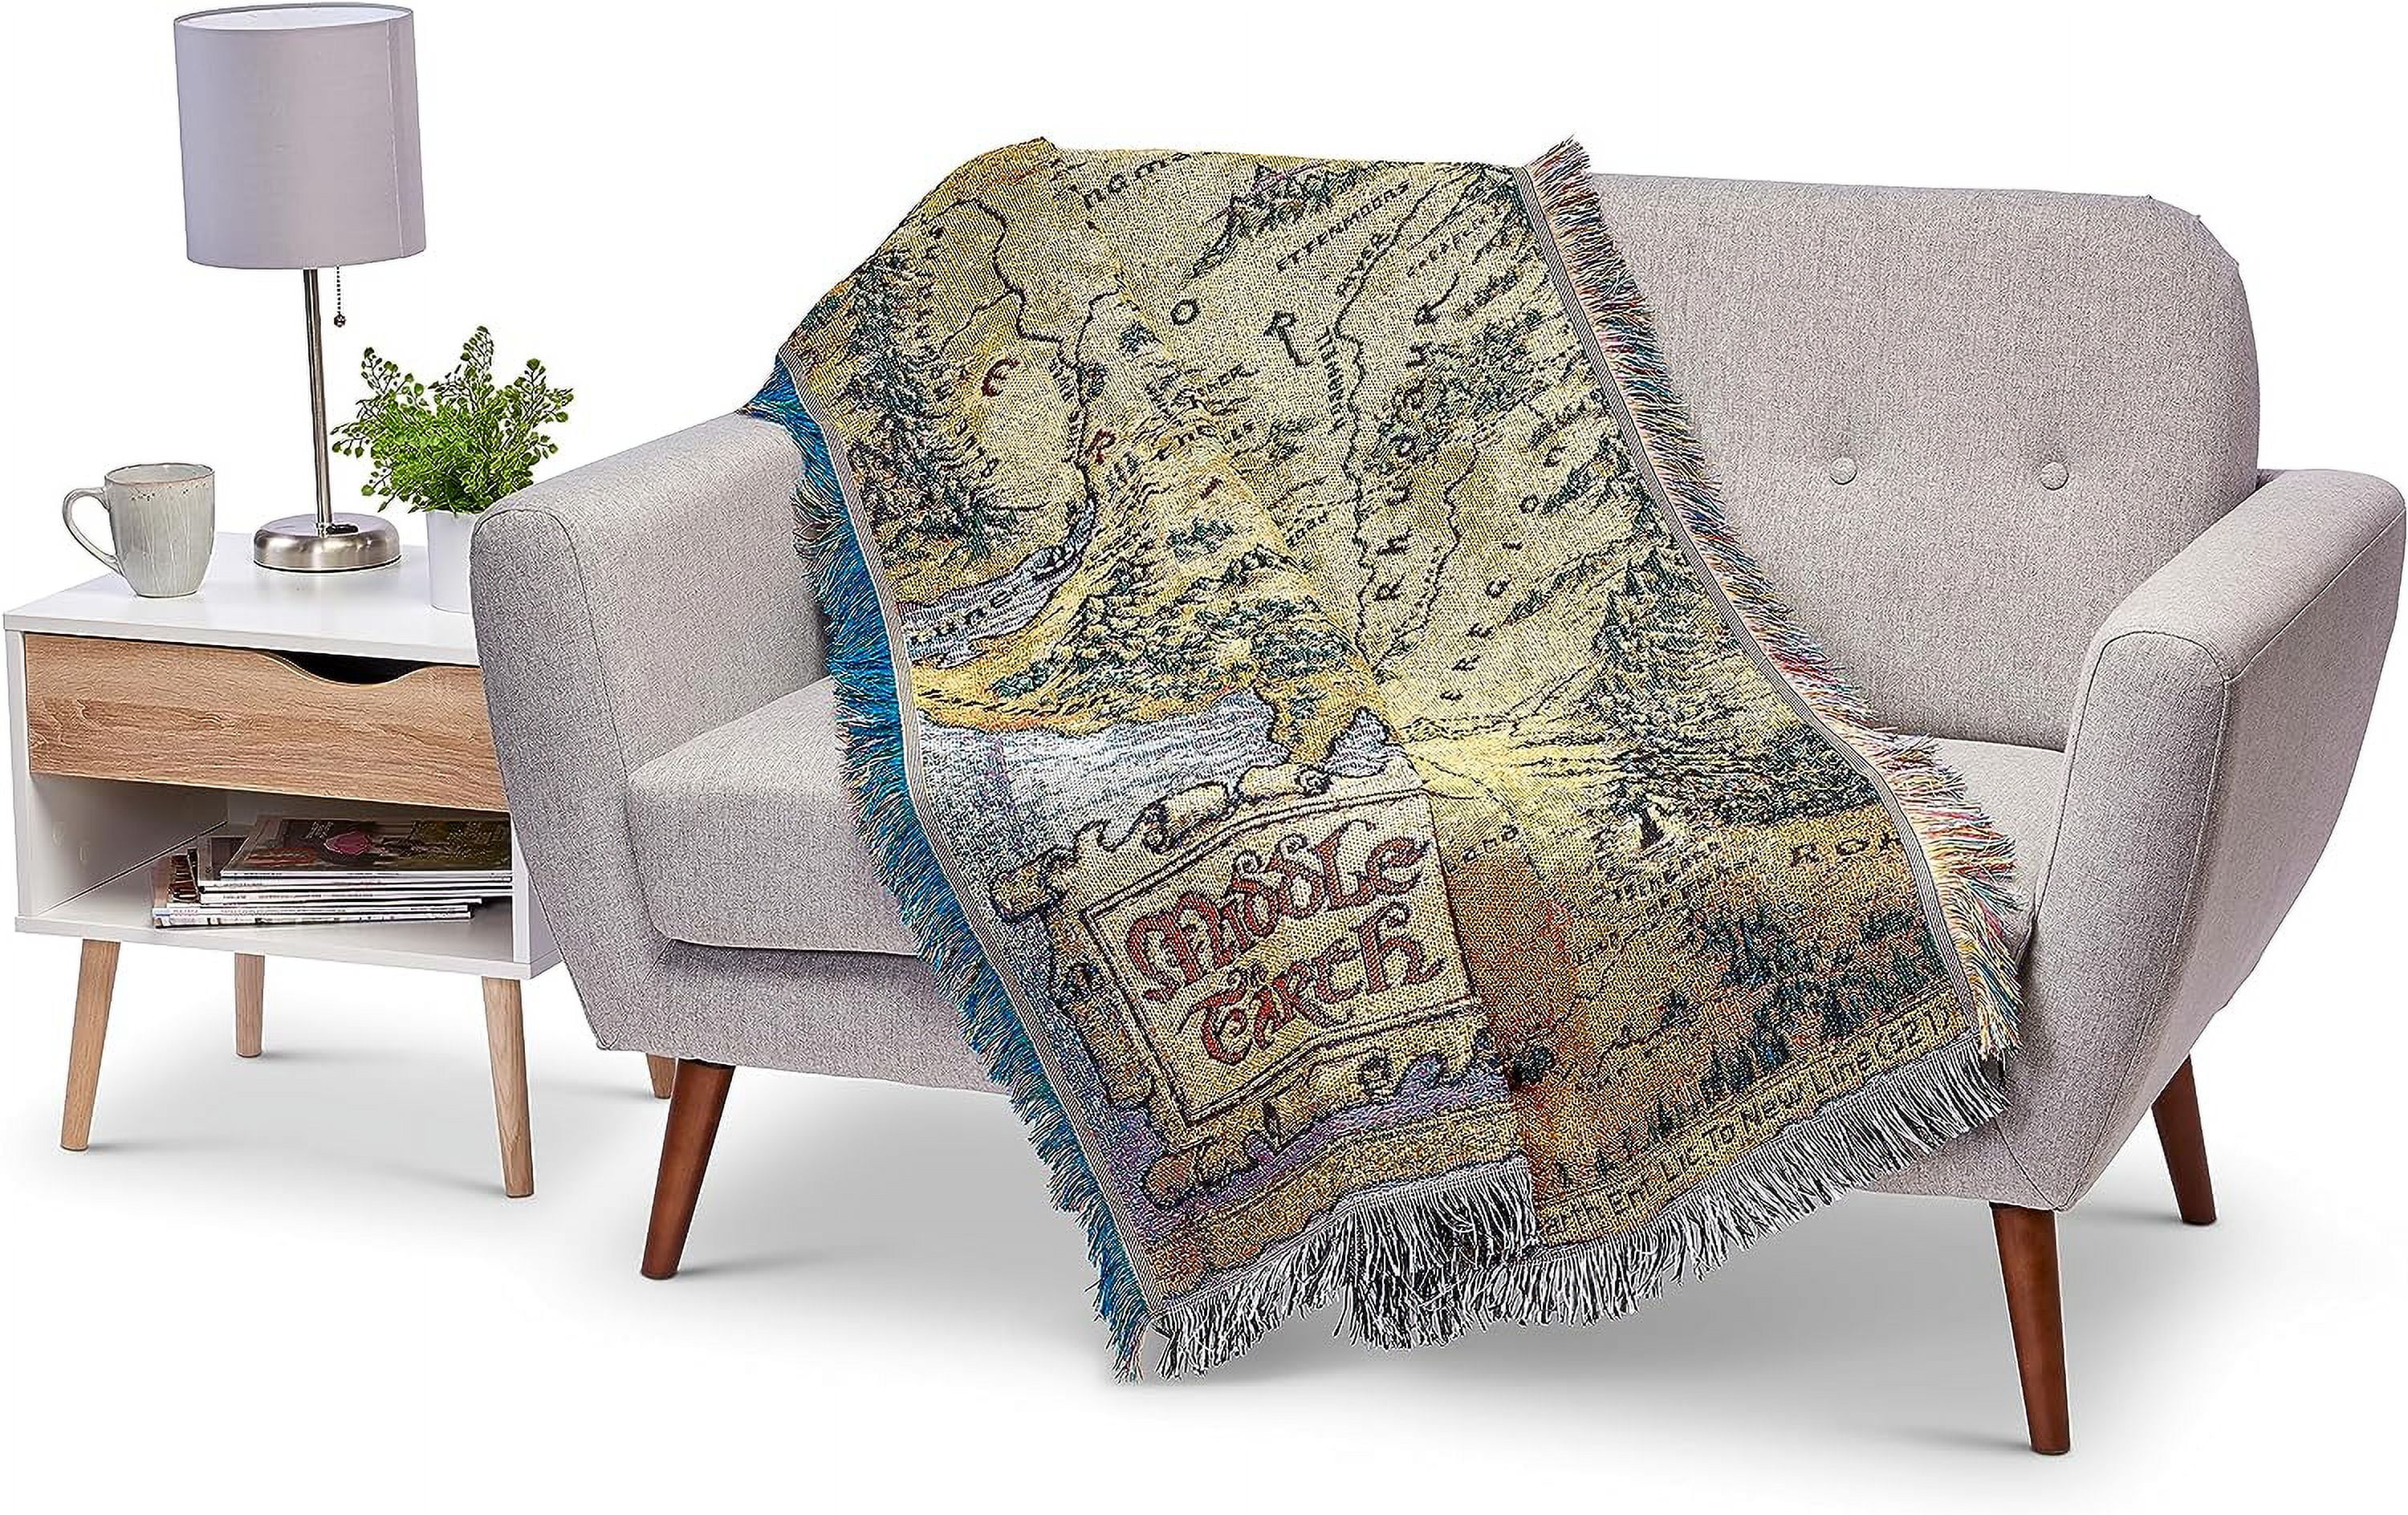 L-Lord of the Rings H-Hobbit HD Blanket,Soft Throw Blanket for Home Bedroom  Bed Sofa Picnic Travel Office Cover Blanket Kids 3D